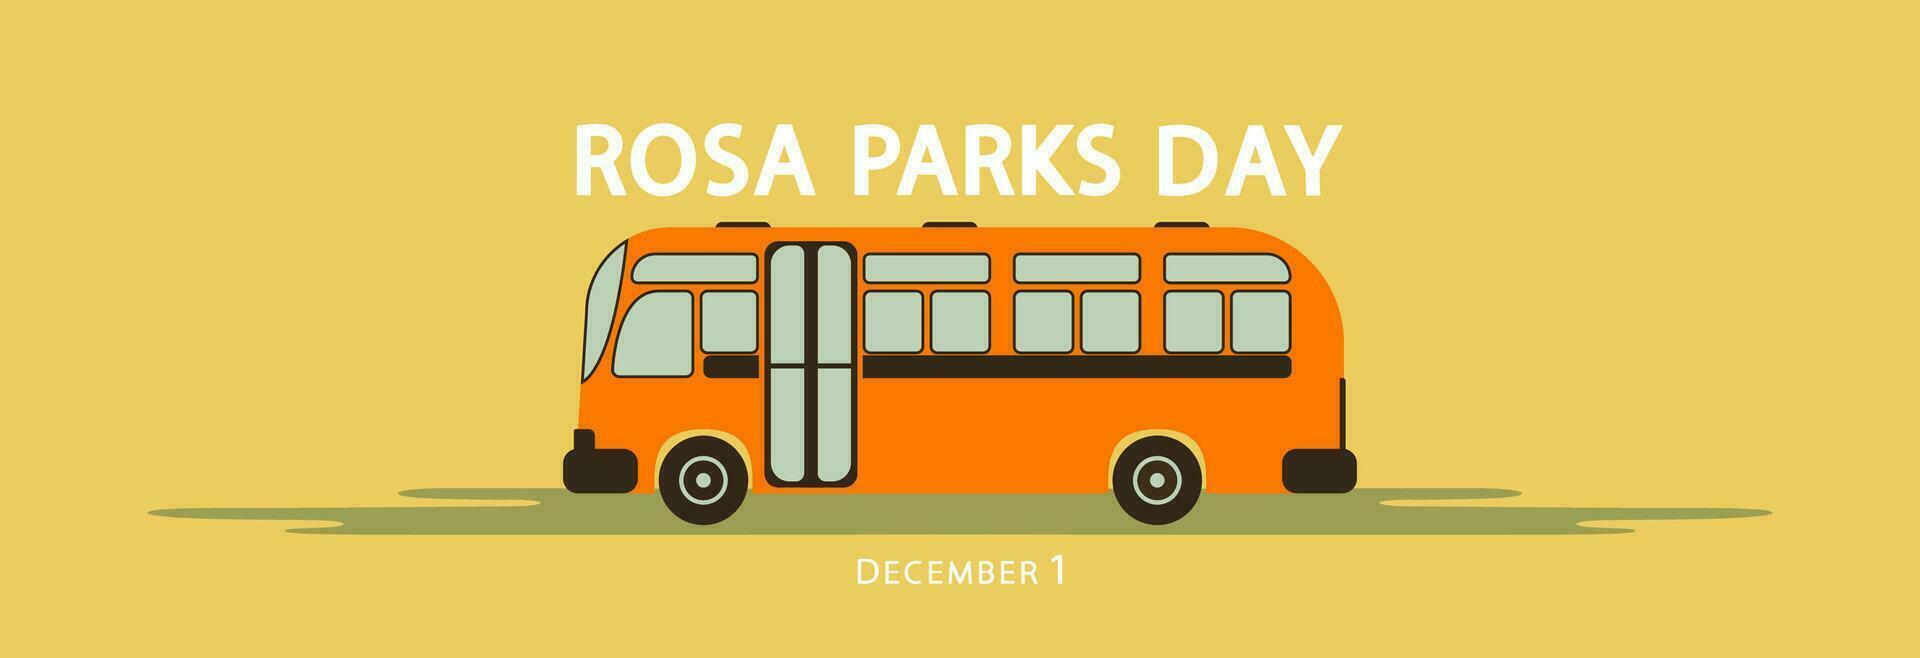 Rosa Parks and the bus. vector